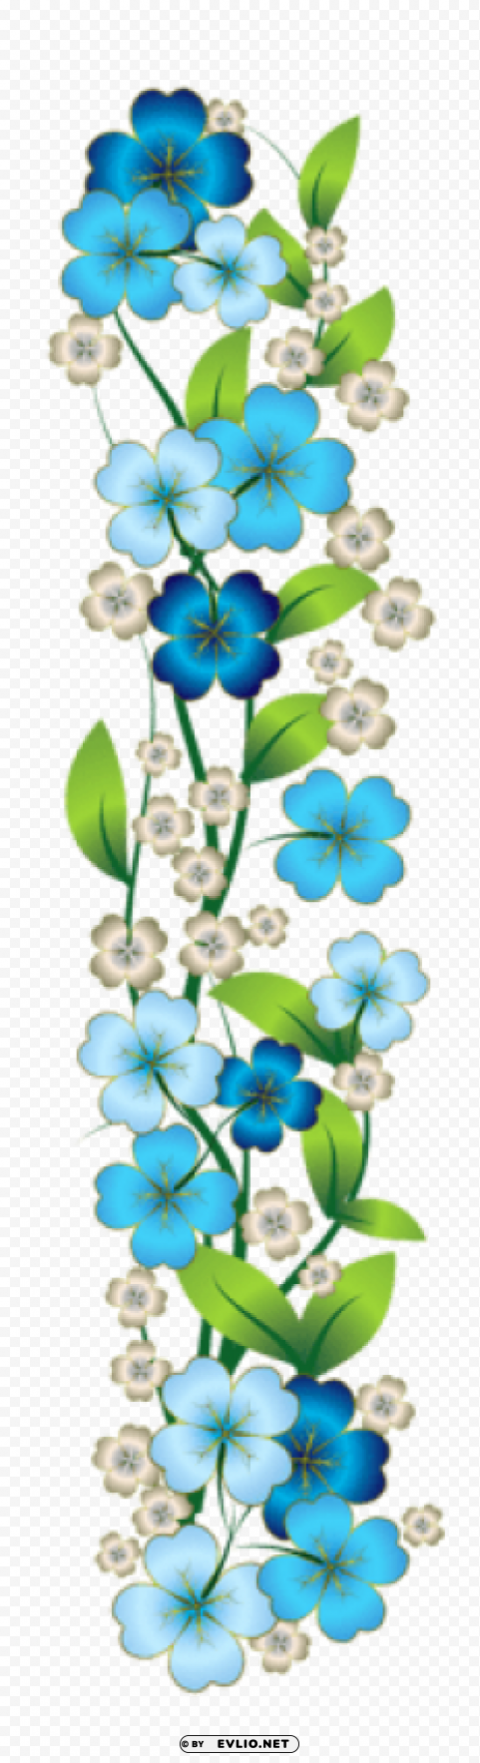 blue flower decor Transparent PNG Isolated Graphic Detail